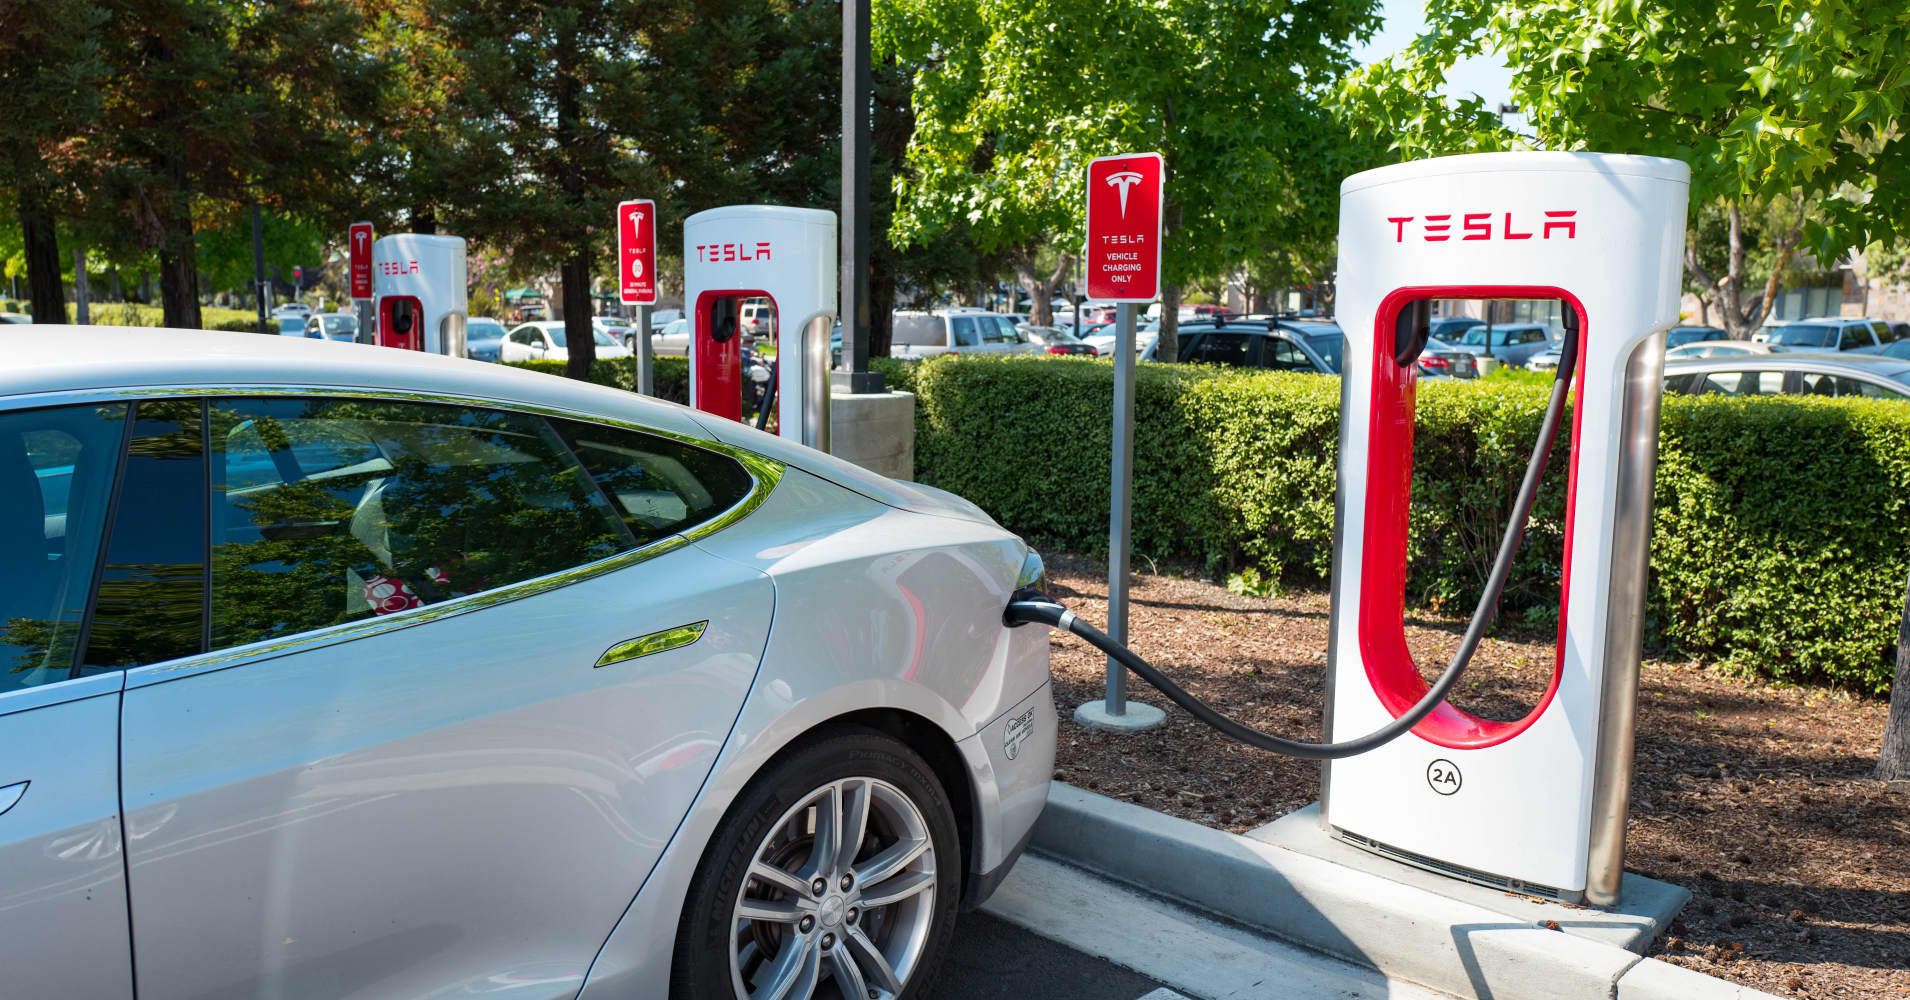 Tesla will double number of Supercharger stations in 2017